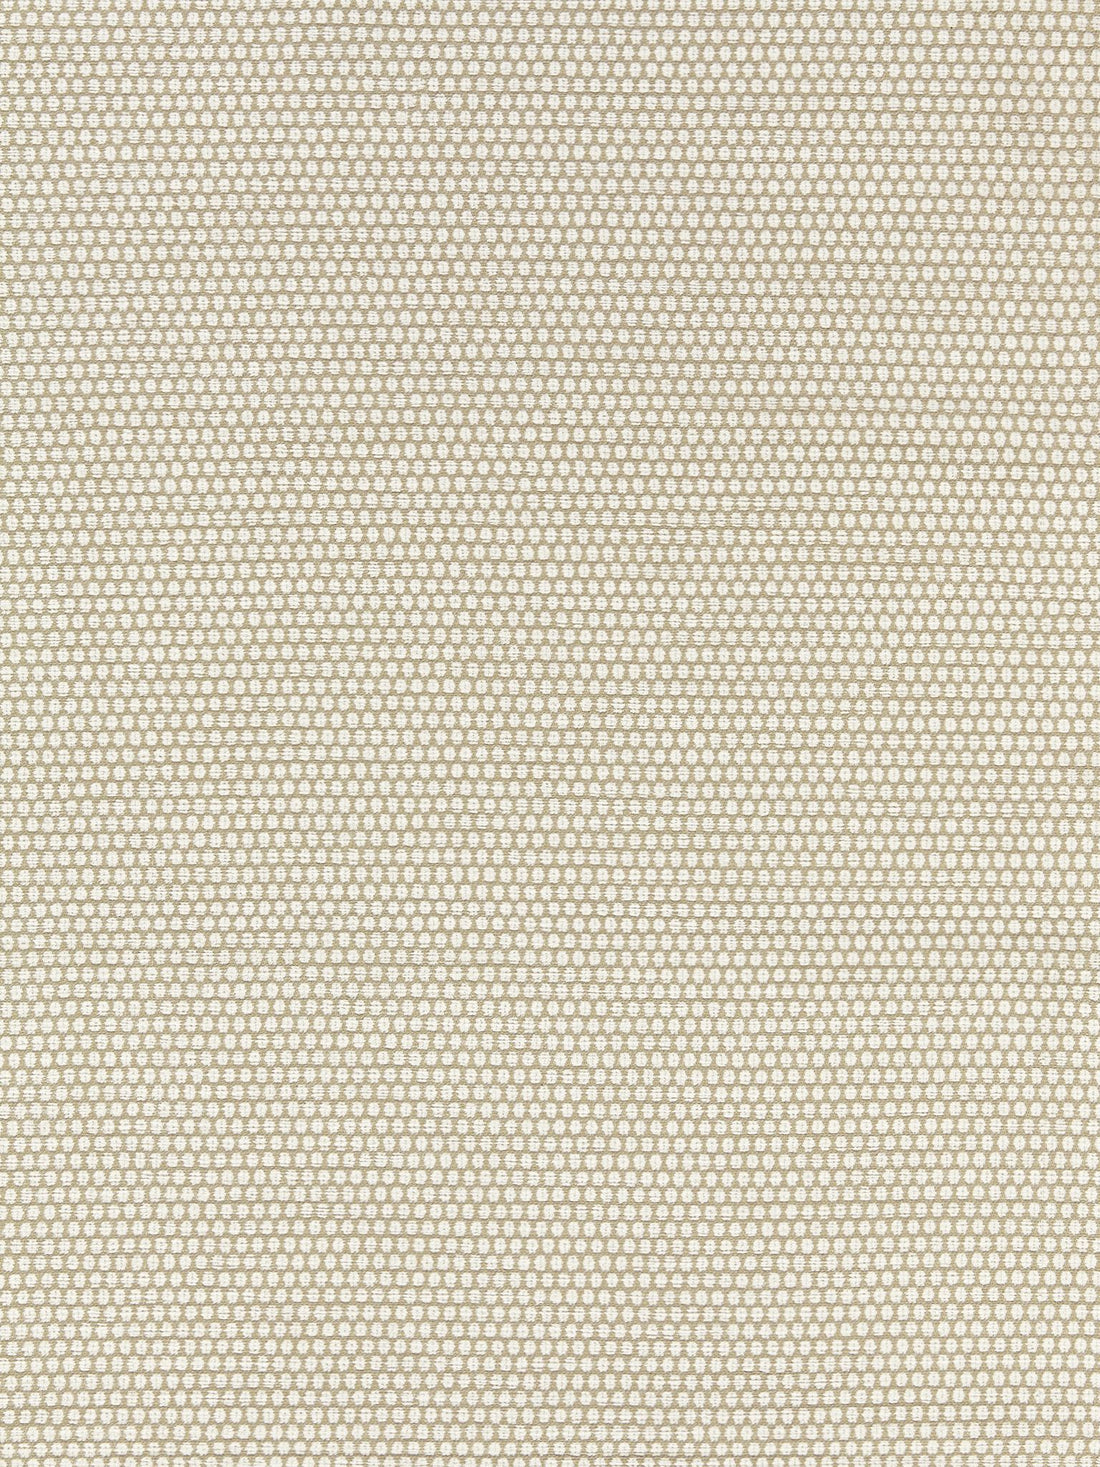 Corsica Weave fabric in sand color - pattern number SC 000127190 - by Scalamandre in the Scalamandre Fabrics Book 1 collection